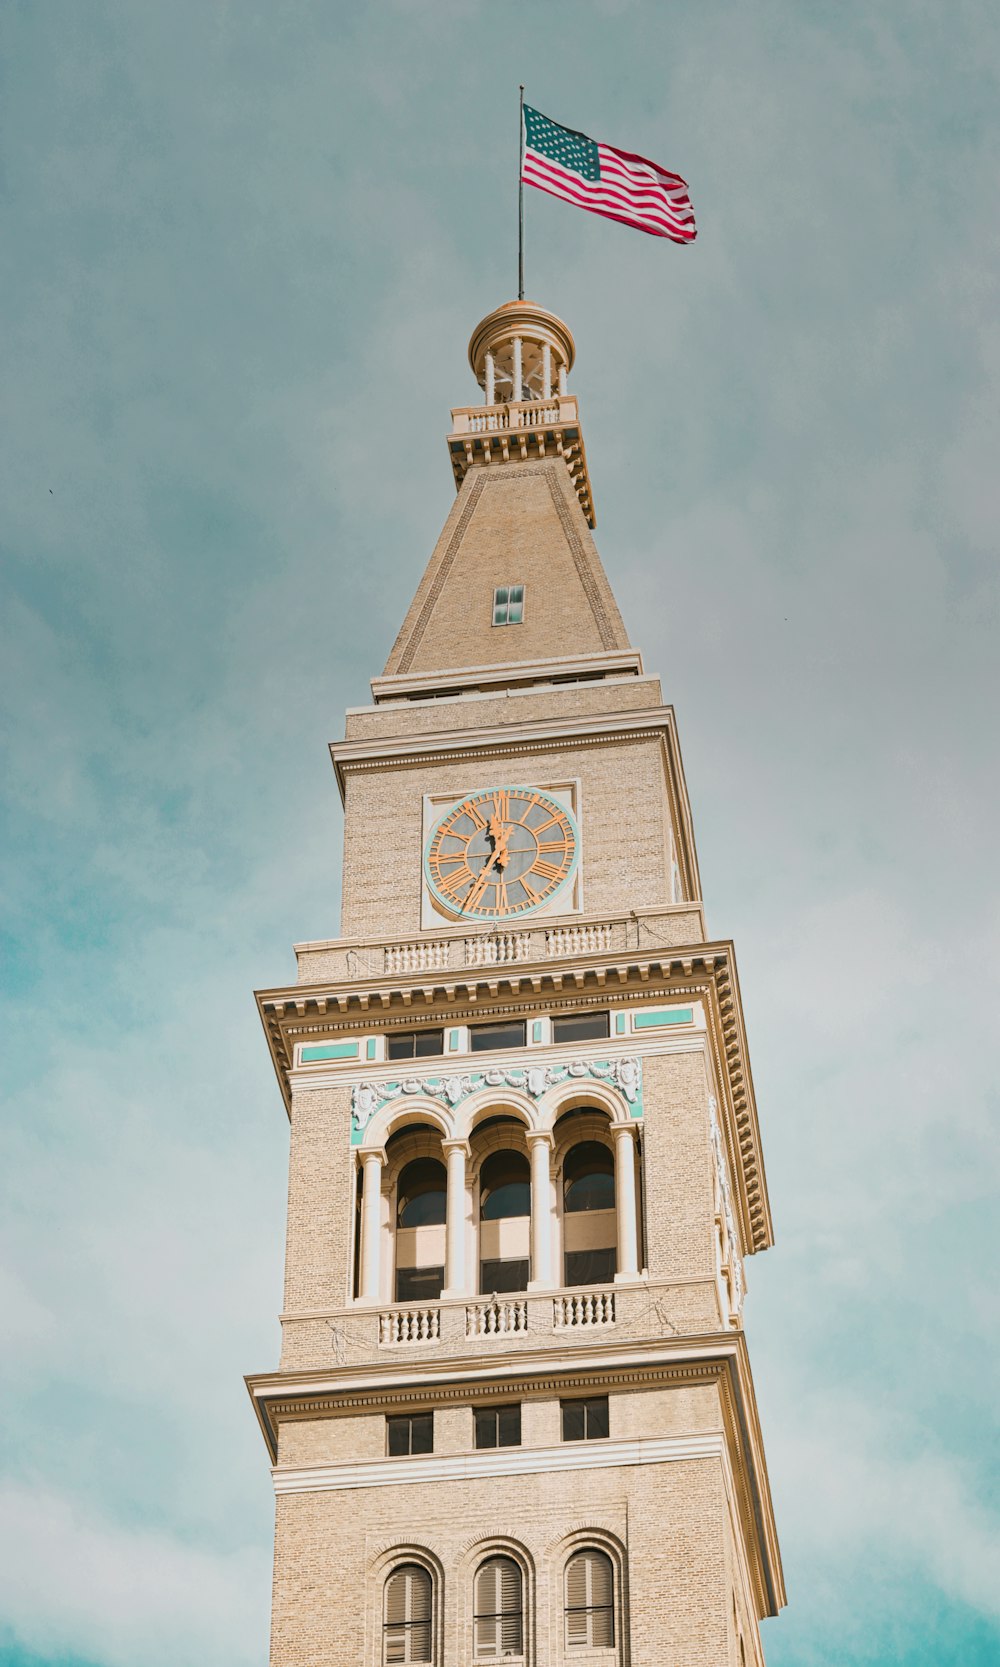 beige and white clock tower